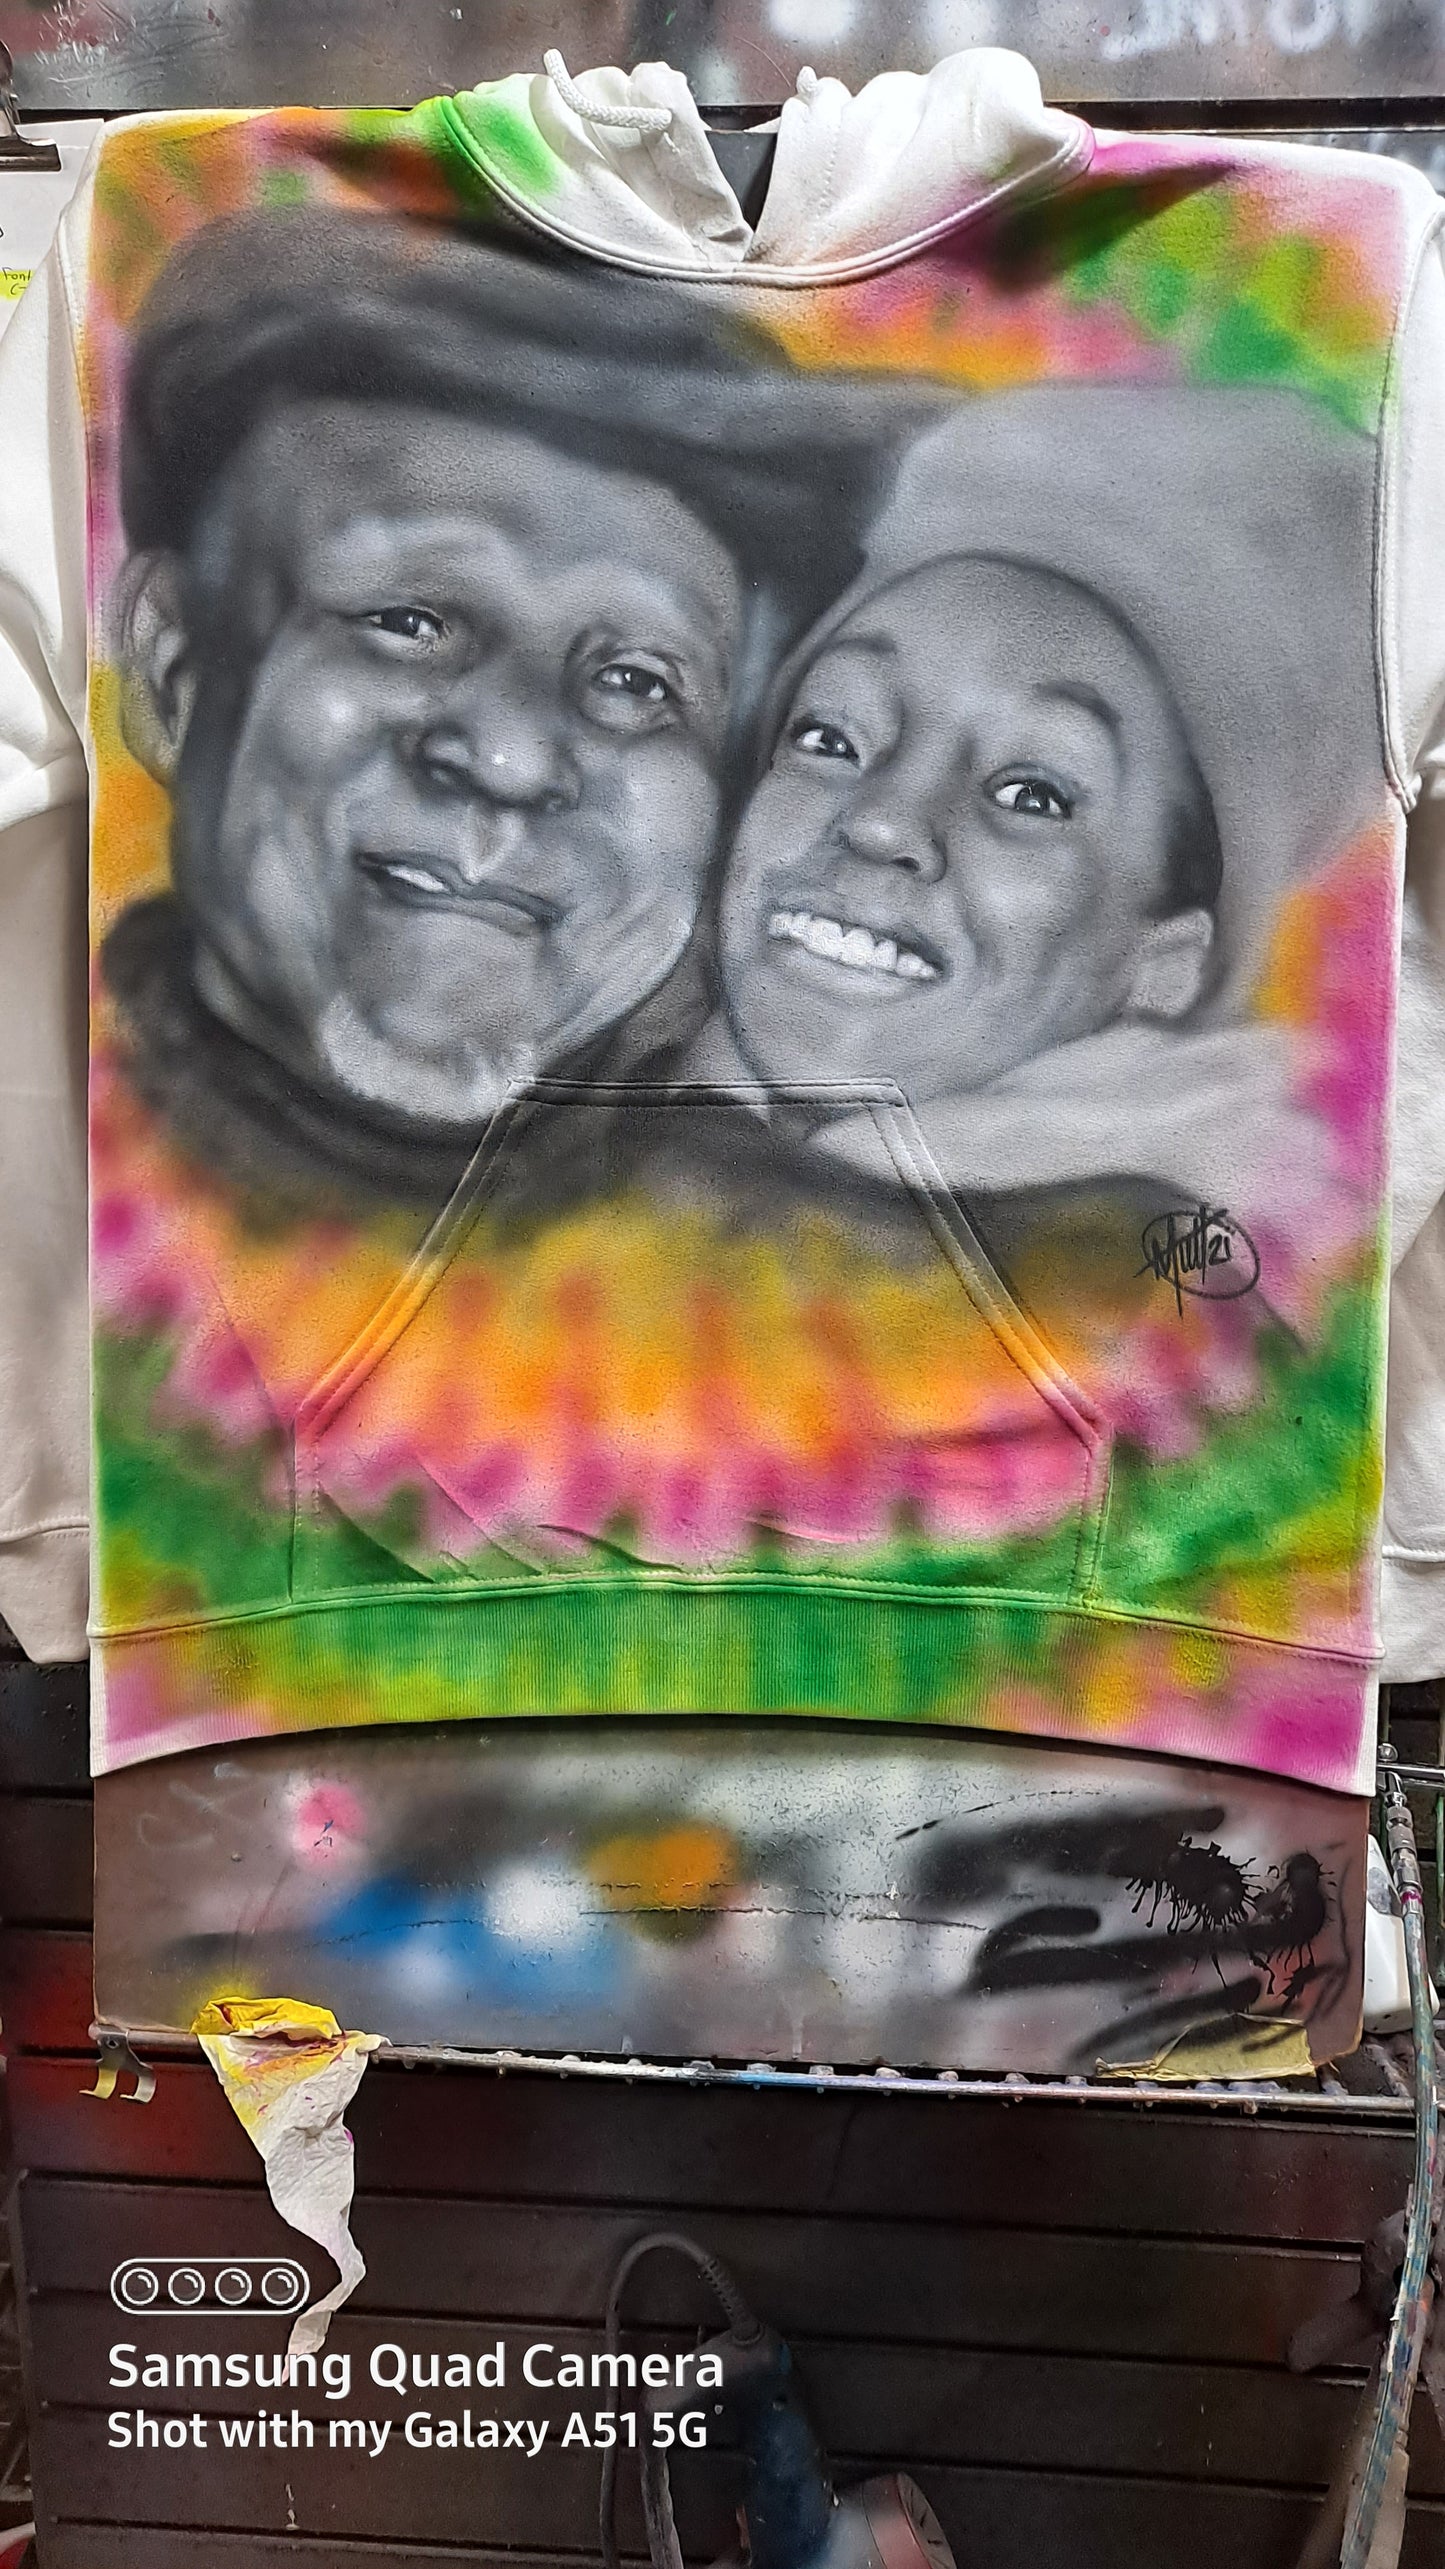 Double Fully Airbrushed Black and White Portrait